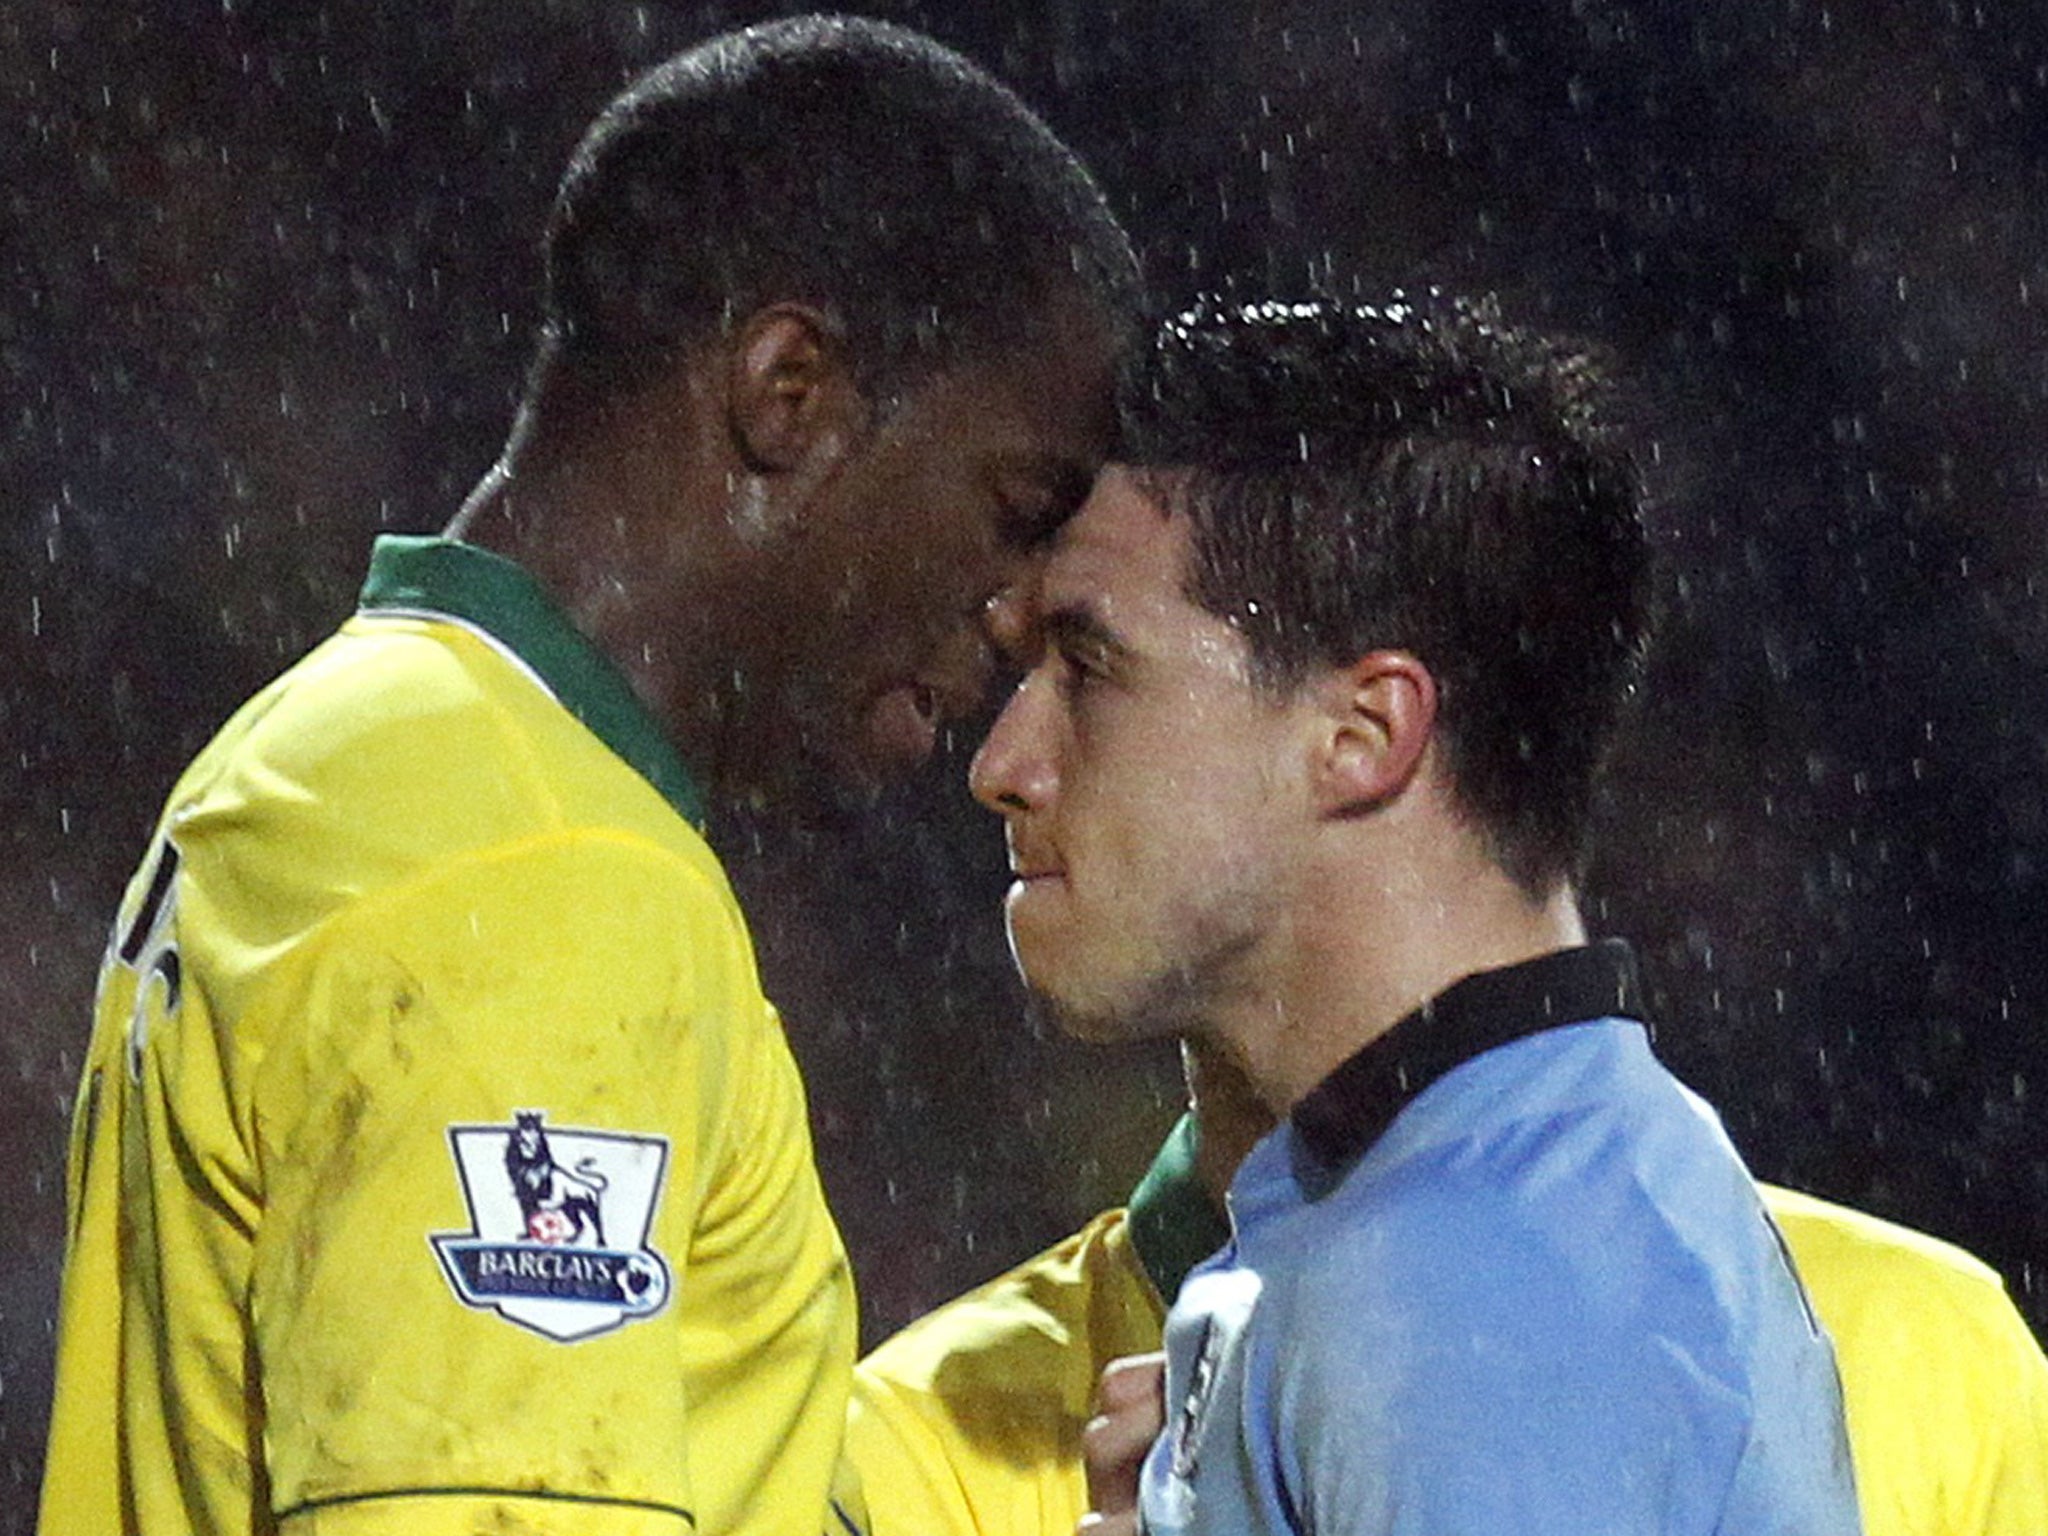 Manchester City’s Samir Nasri (right) gets up close and personal with Norwich’s Sebastien Bassong on Saturday. Nasri was sent off, Bassong received a yellow card